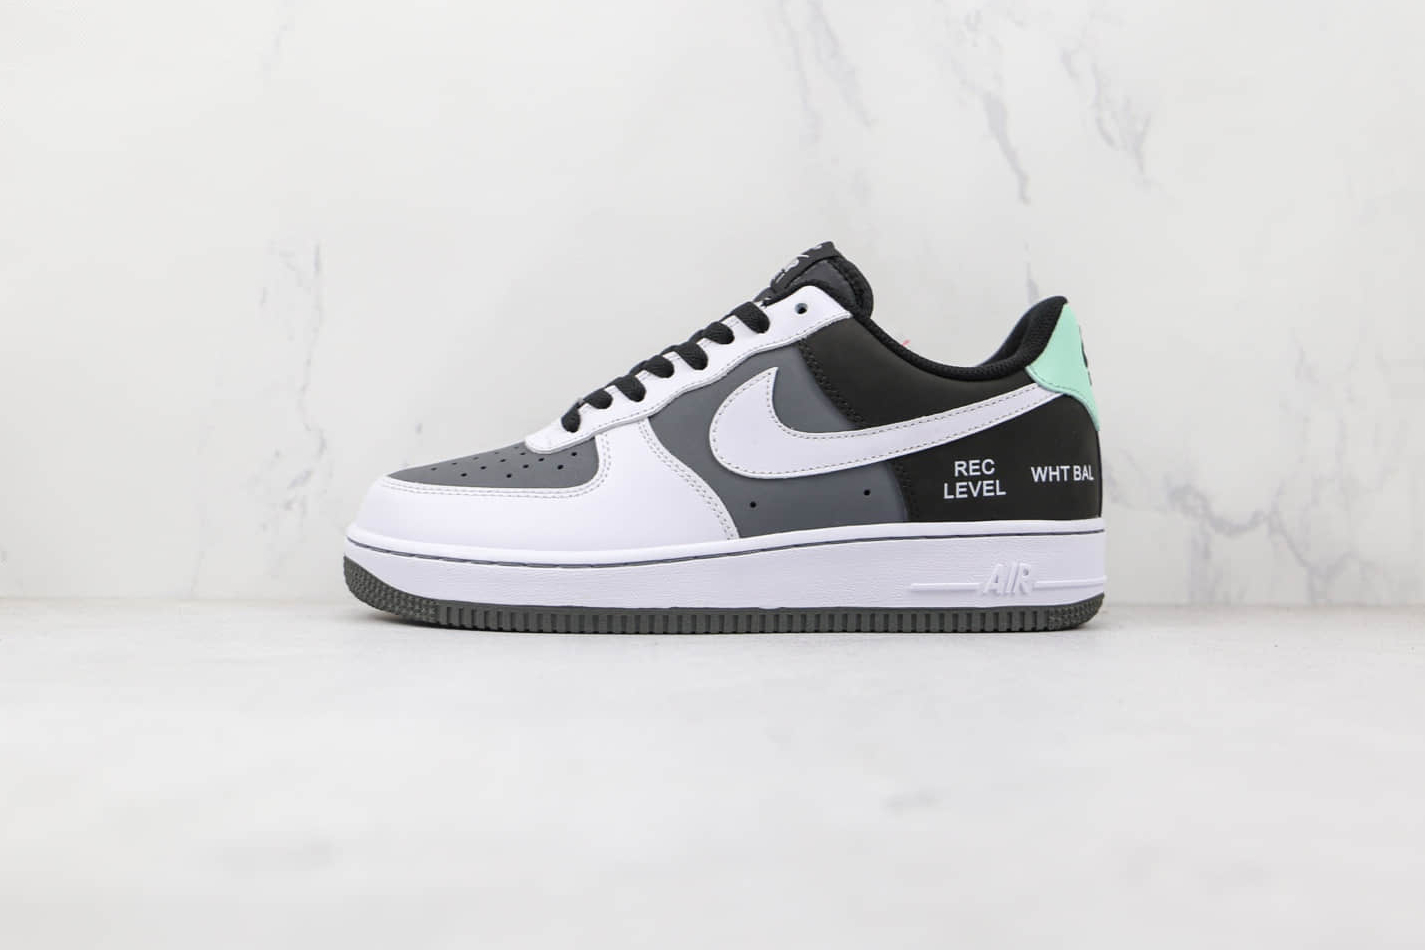 Nike Air Force 1 Low Camcorder Black White Grey GD5060-755 - Stylish and Versatile Sneakers.